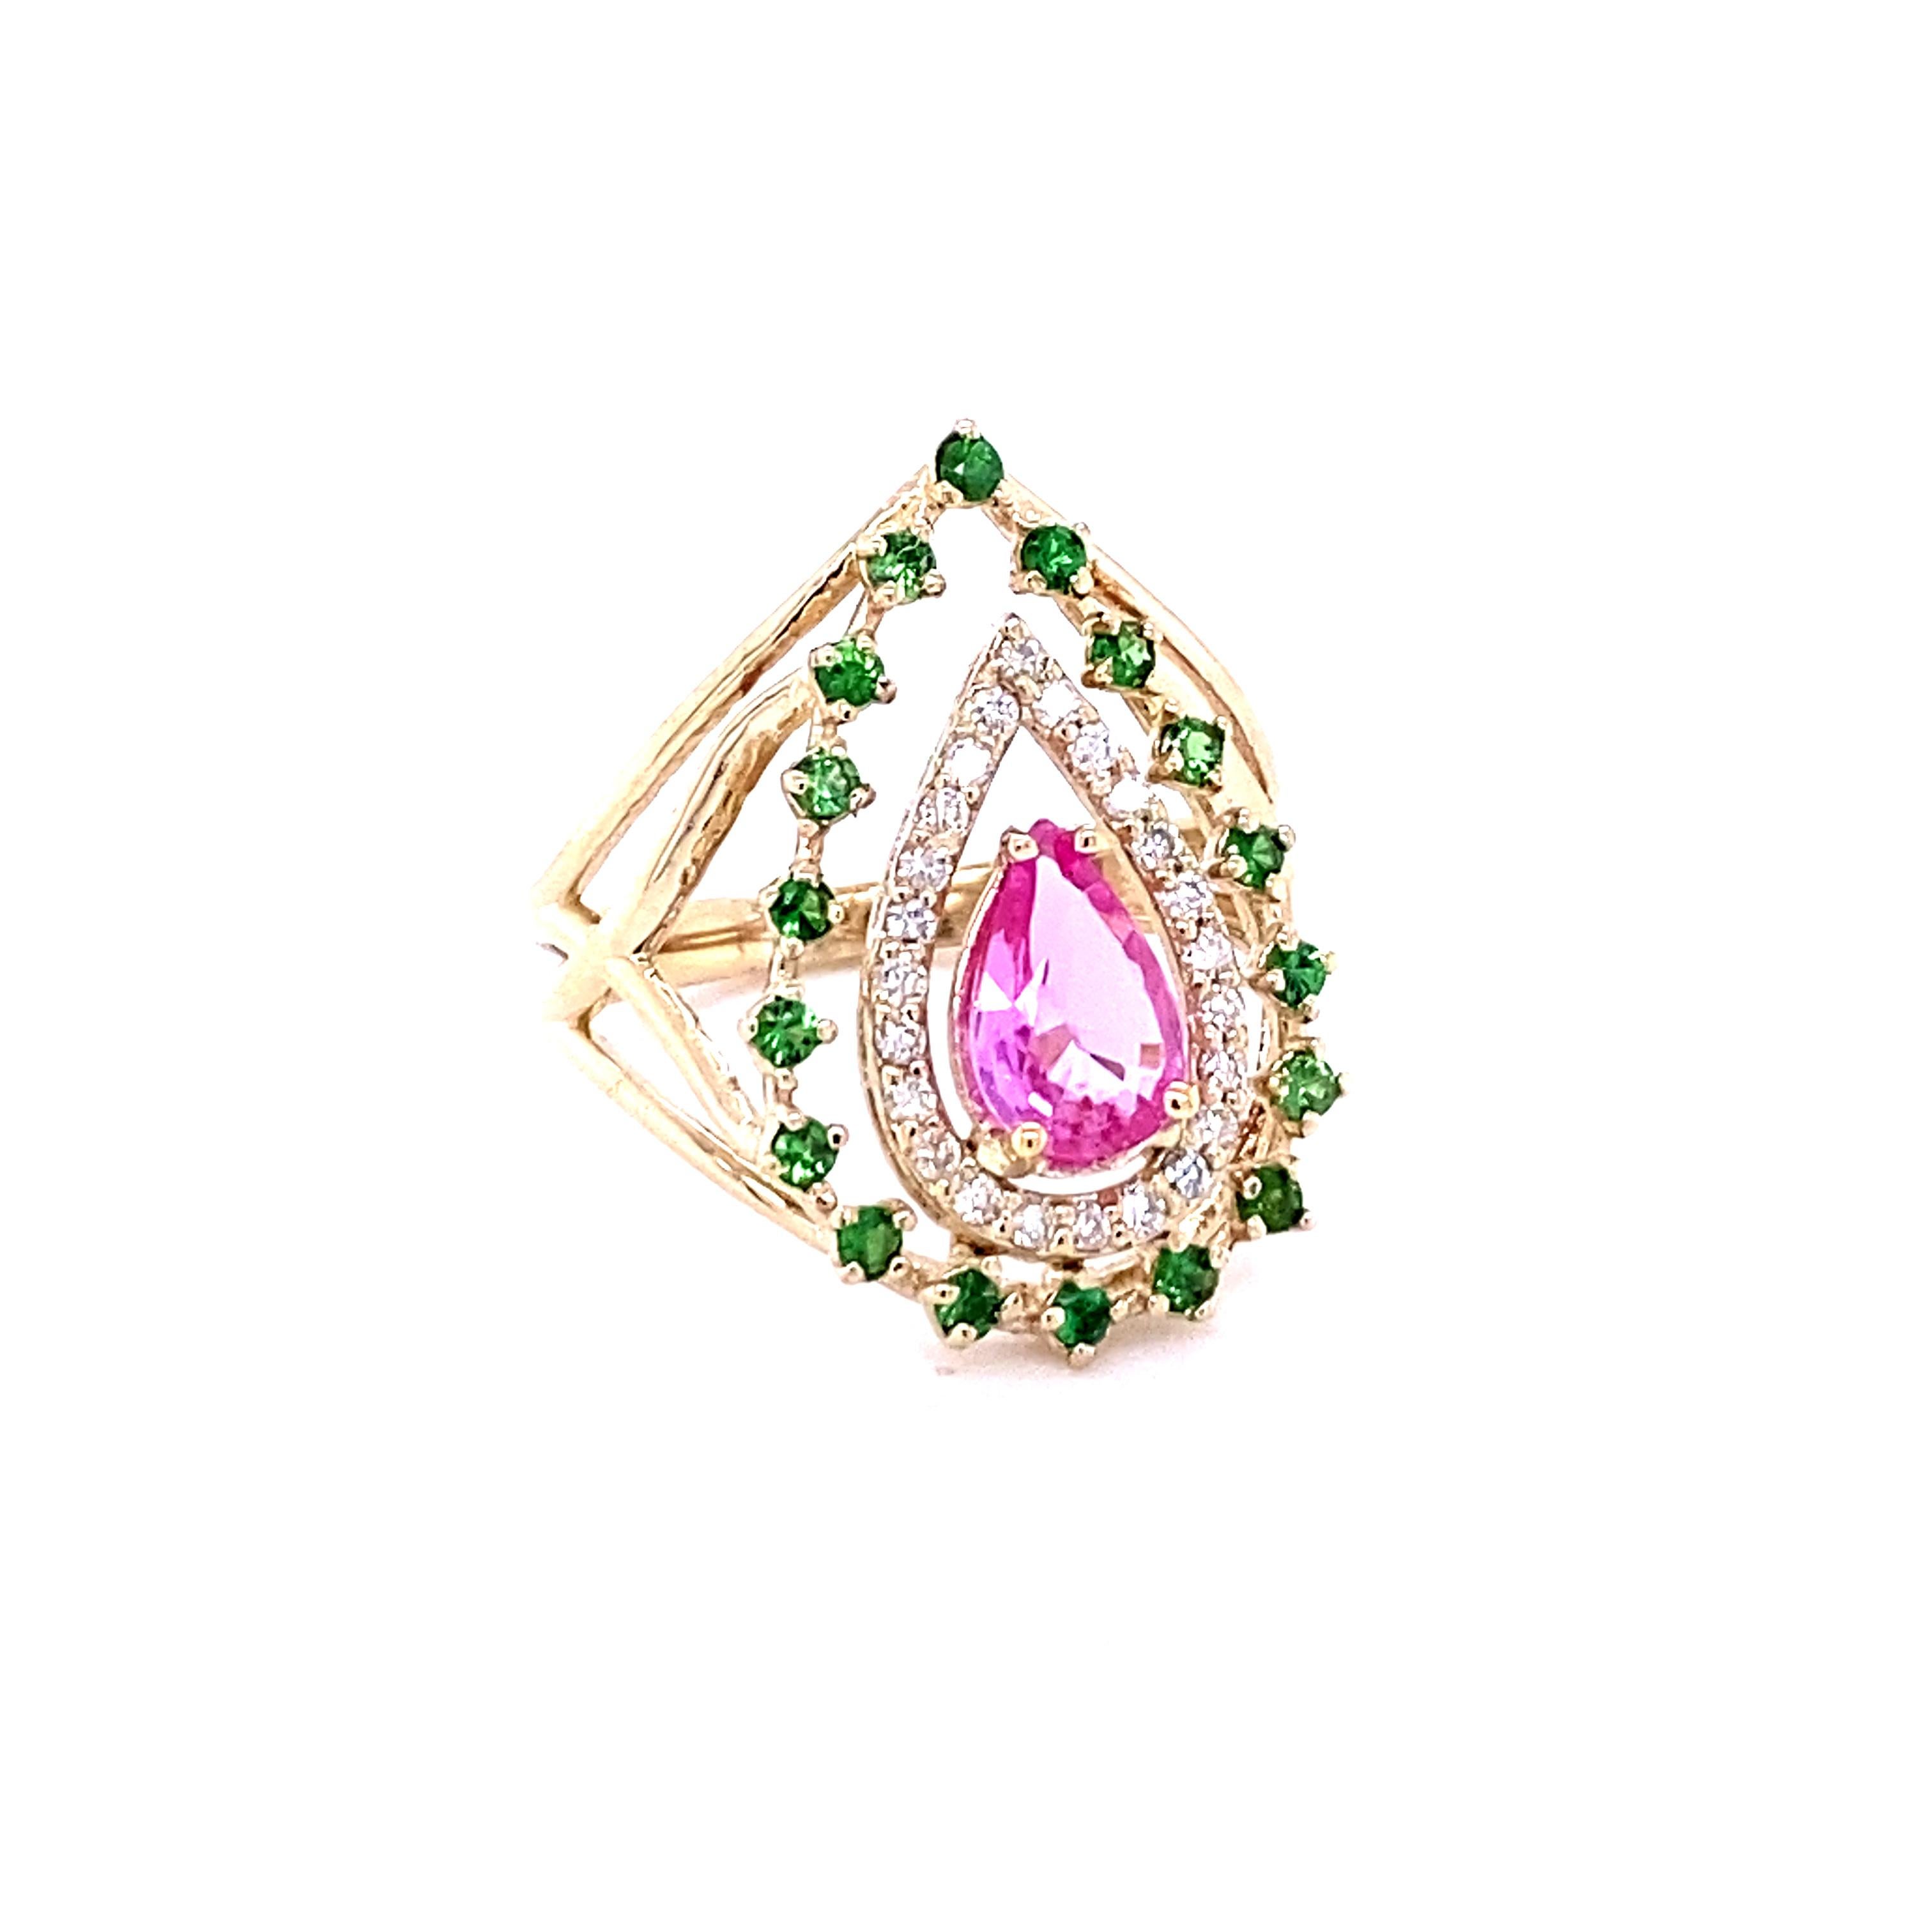 This beautiful ring has a Pear Cut Pink Sapphire that weighs 0.93 Carats.
The ring is embellished with 24 Round Cut Diamonds that weigh 0.23 Carats (Clarity: VS, Color: H) as well as 19 Tsavorites that weigh 0.36 Carats.  The total carat weight of